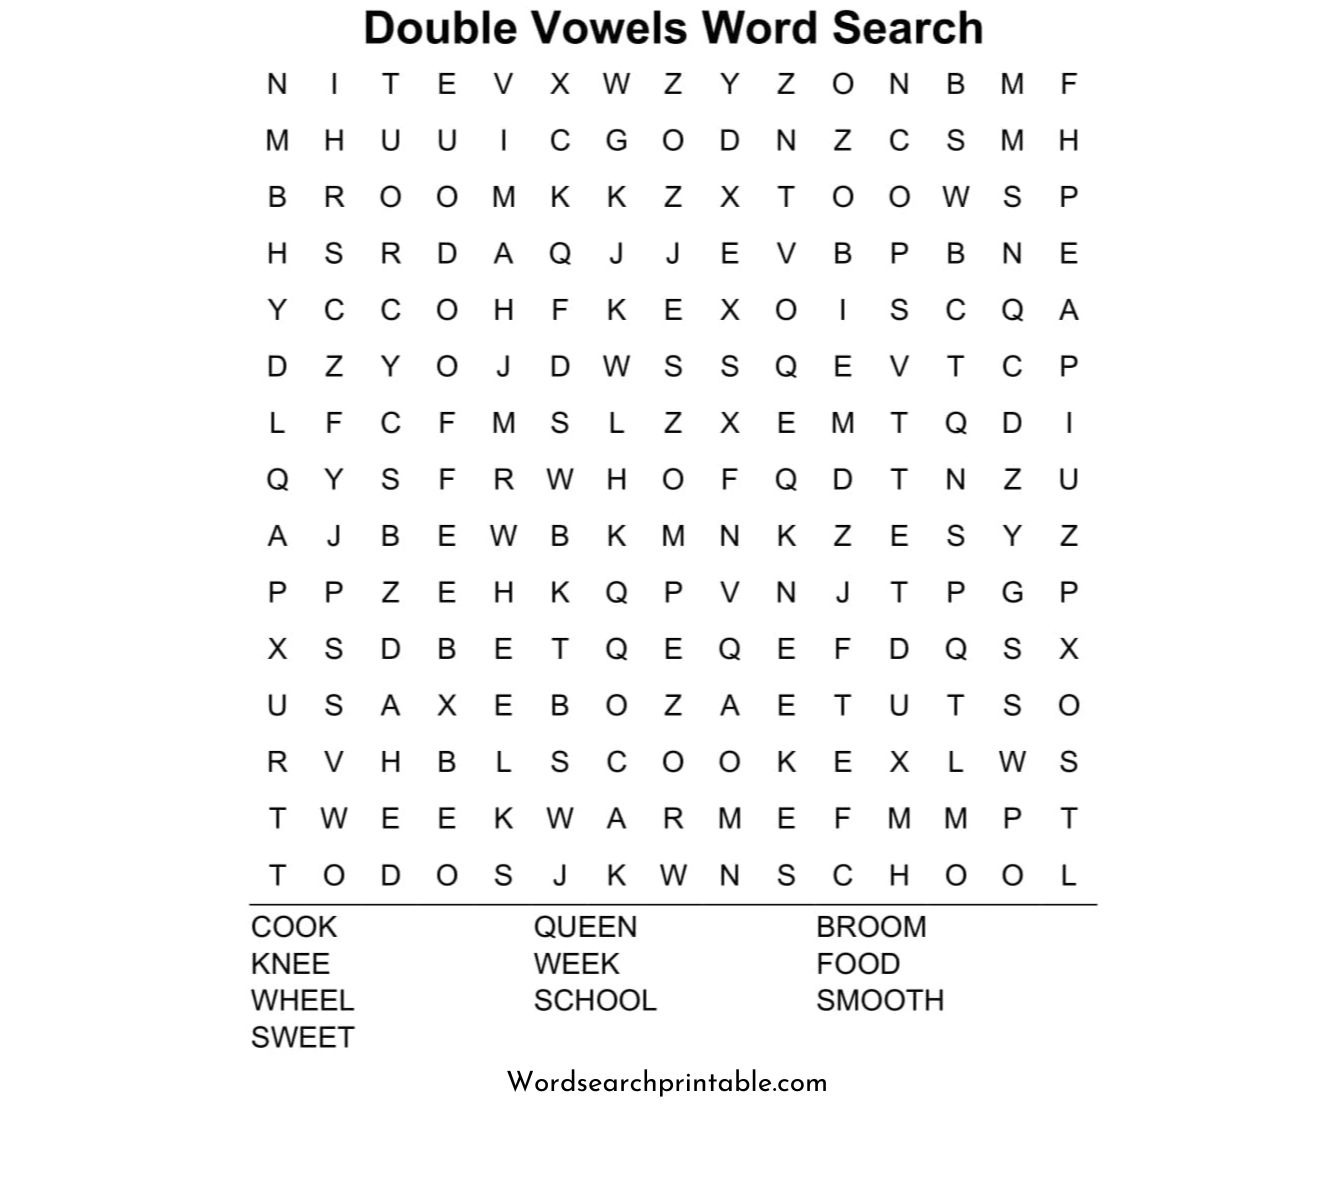 double vowels word search puzzle